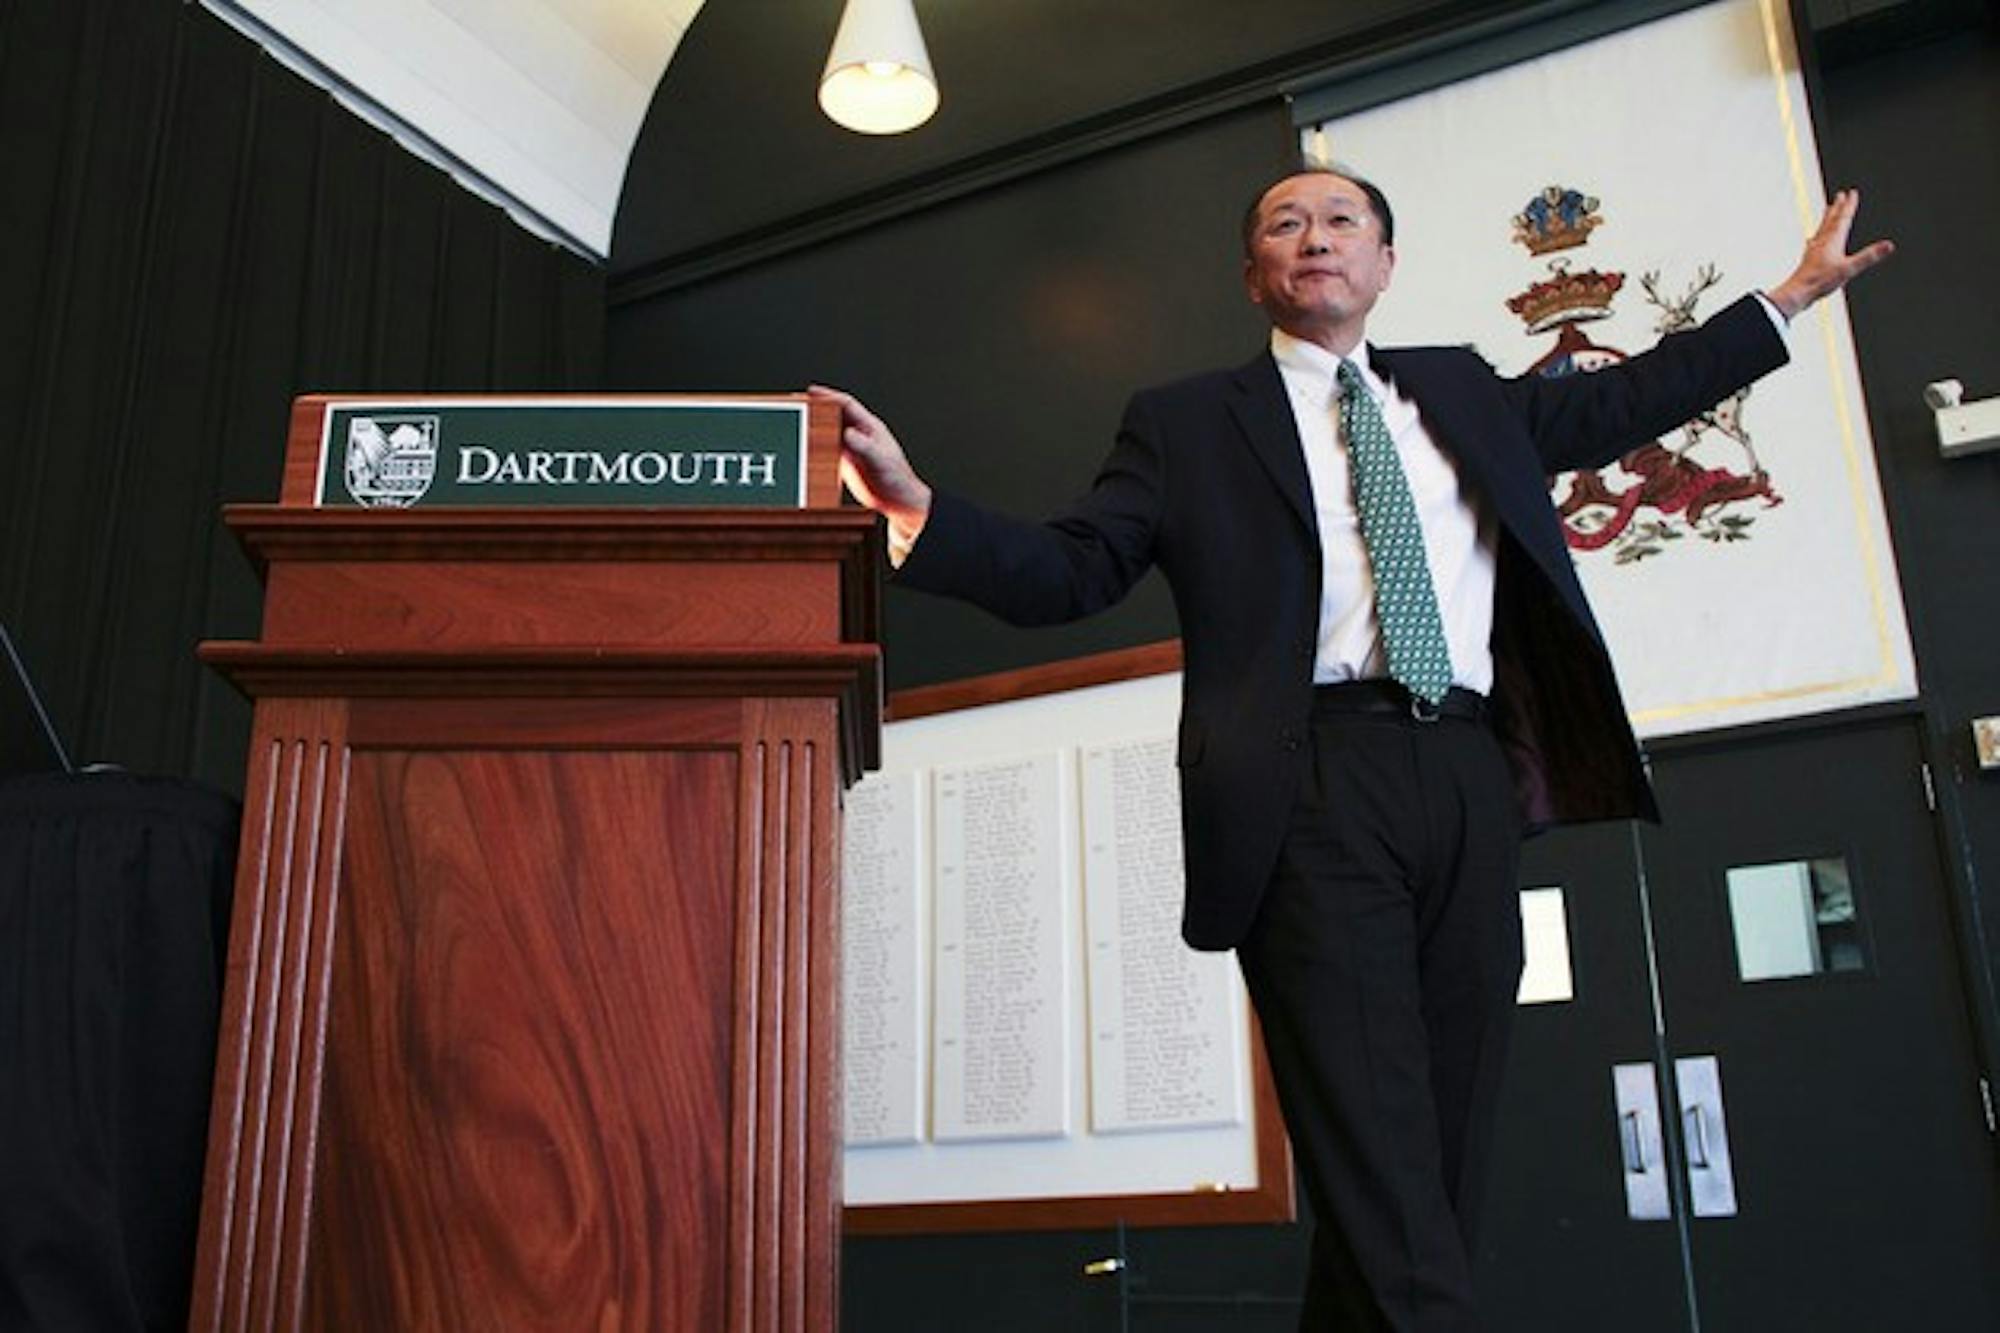 President Jim Yong Kim will leave Dartmouth on June 30 to lead the World Bank after less than three years as president.